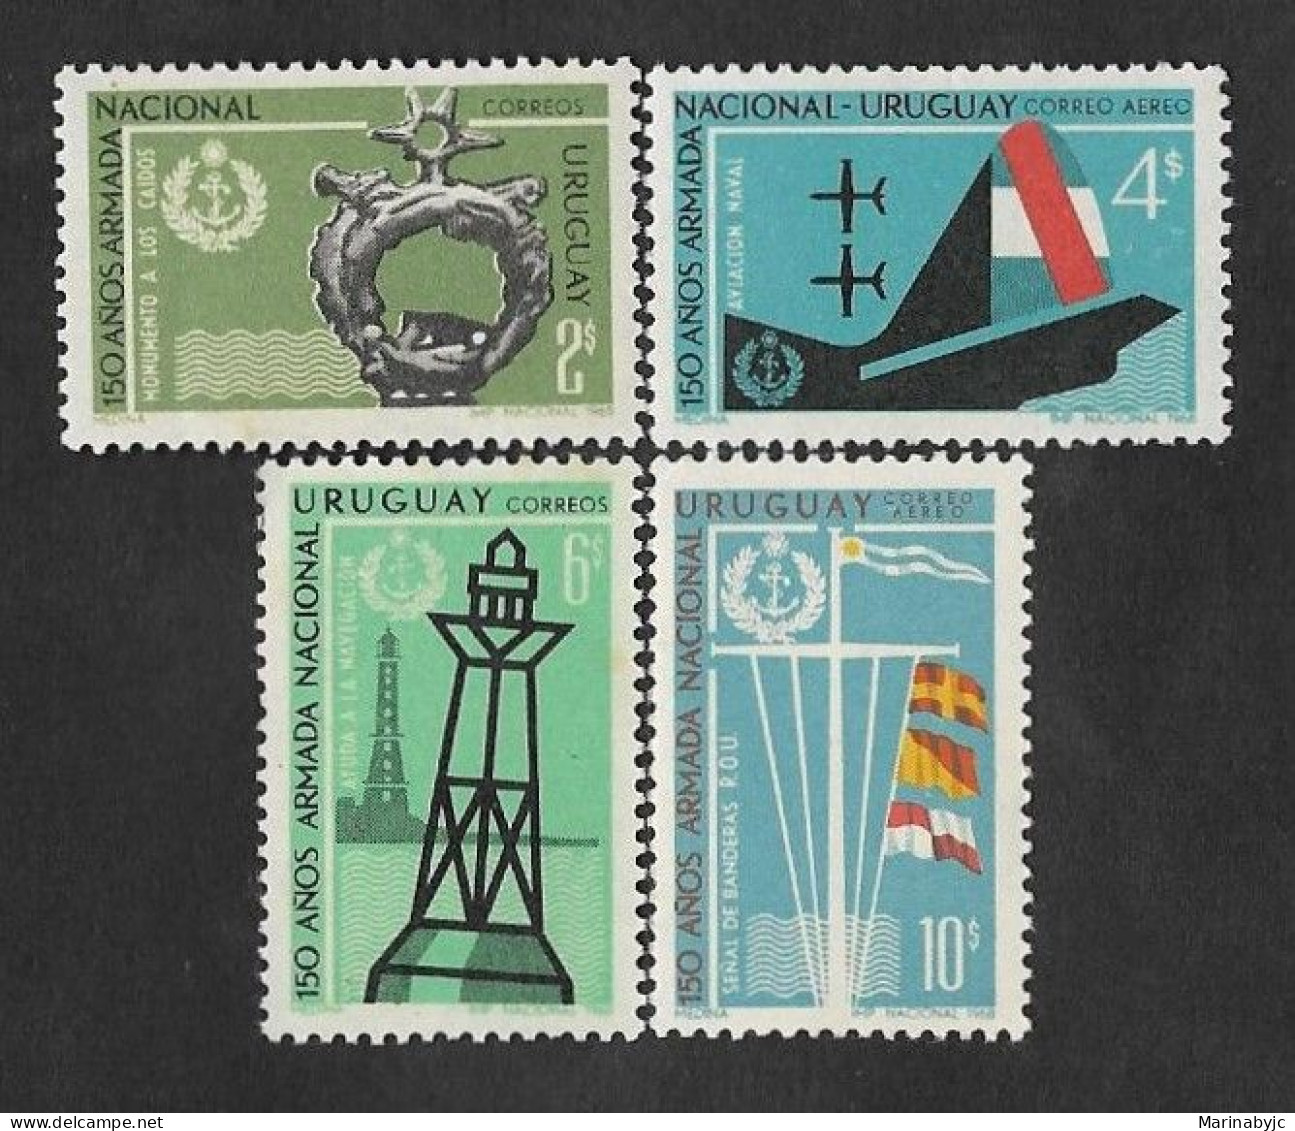 SD)1968 URUGUAY COMPLETE SERIES, 150° YEARS OF THE NATIONAL NAVY, 4 STAMPS MNH - Uruguay